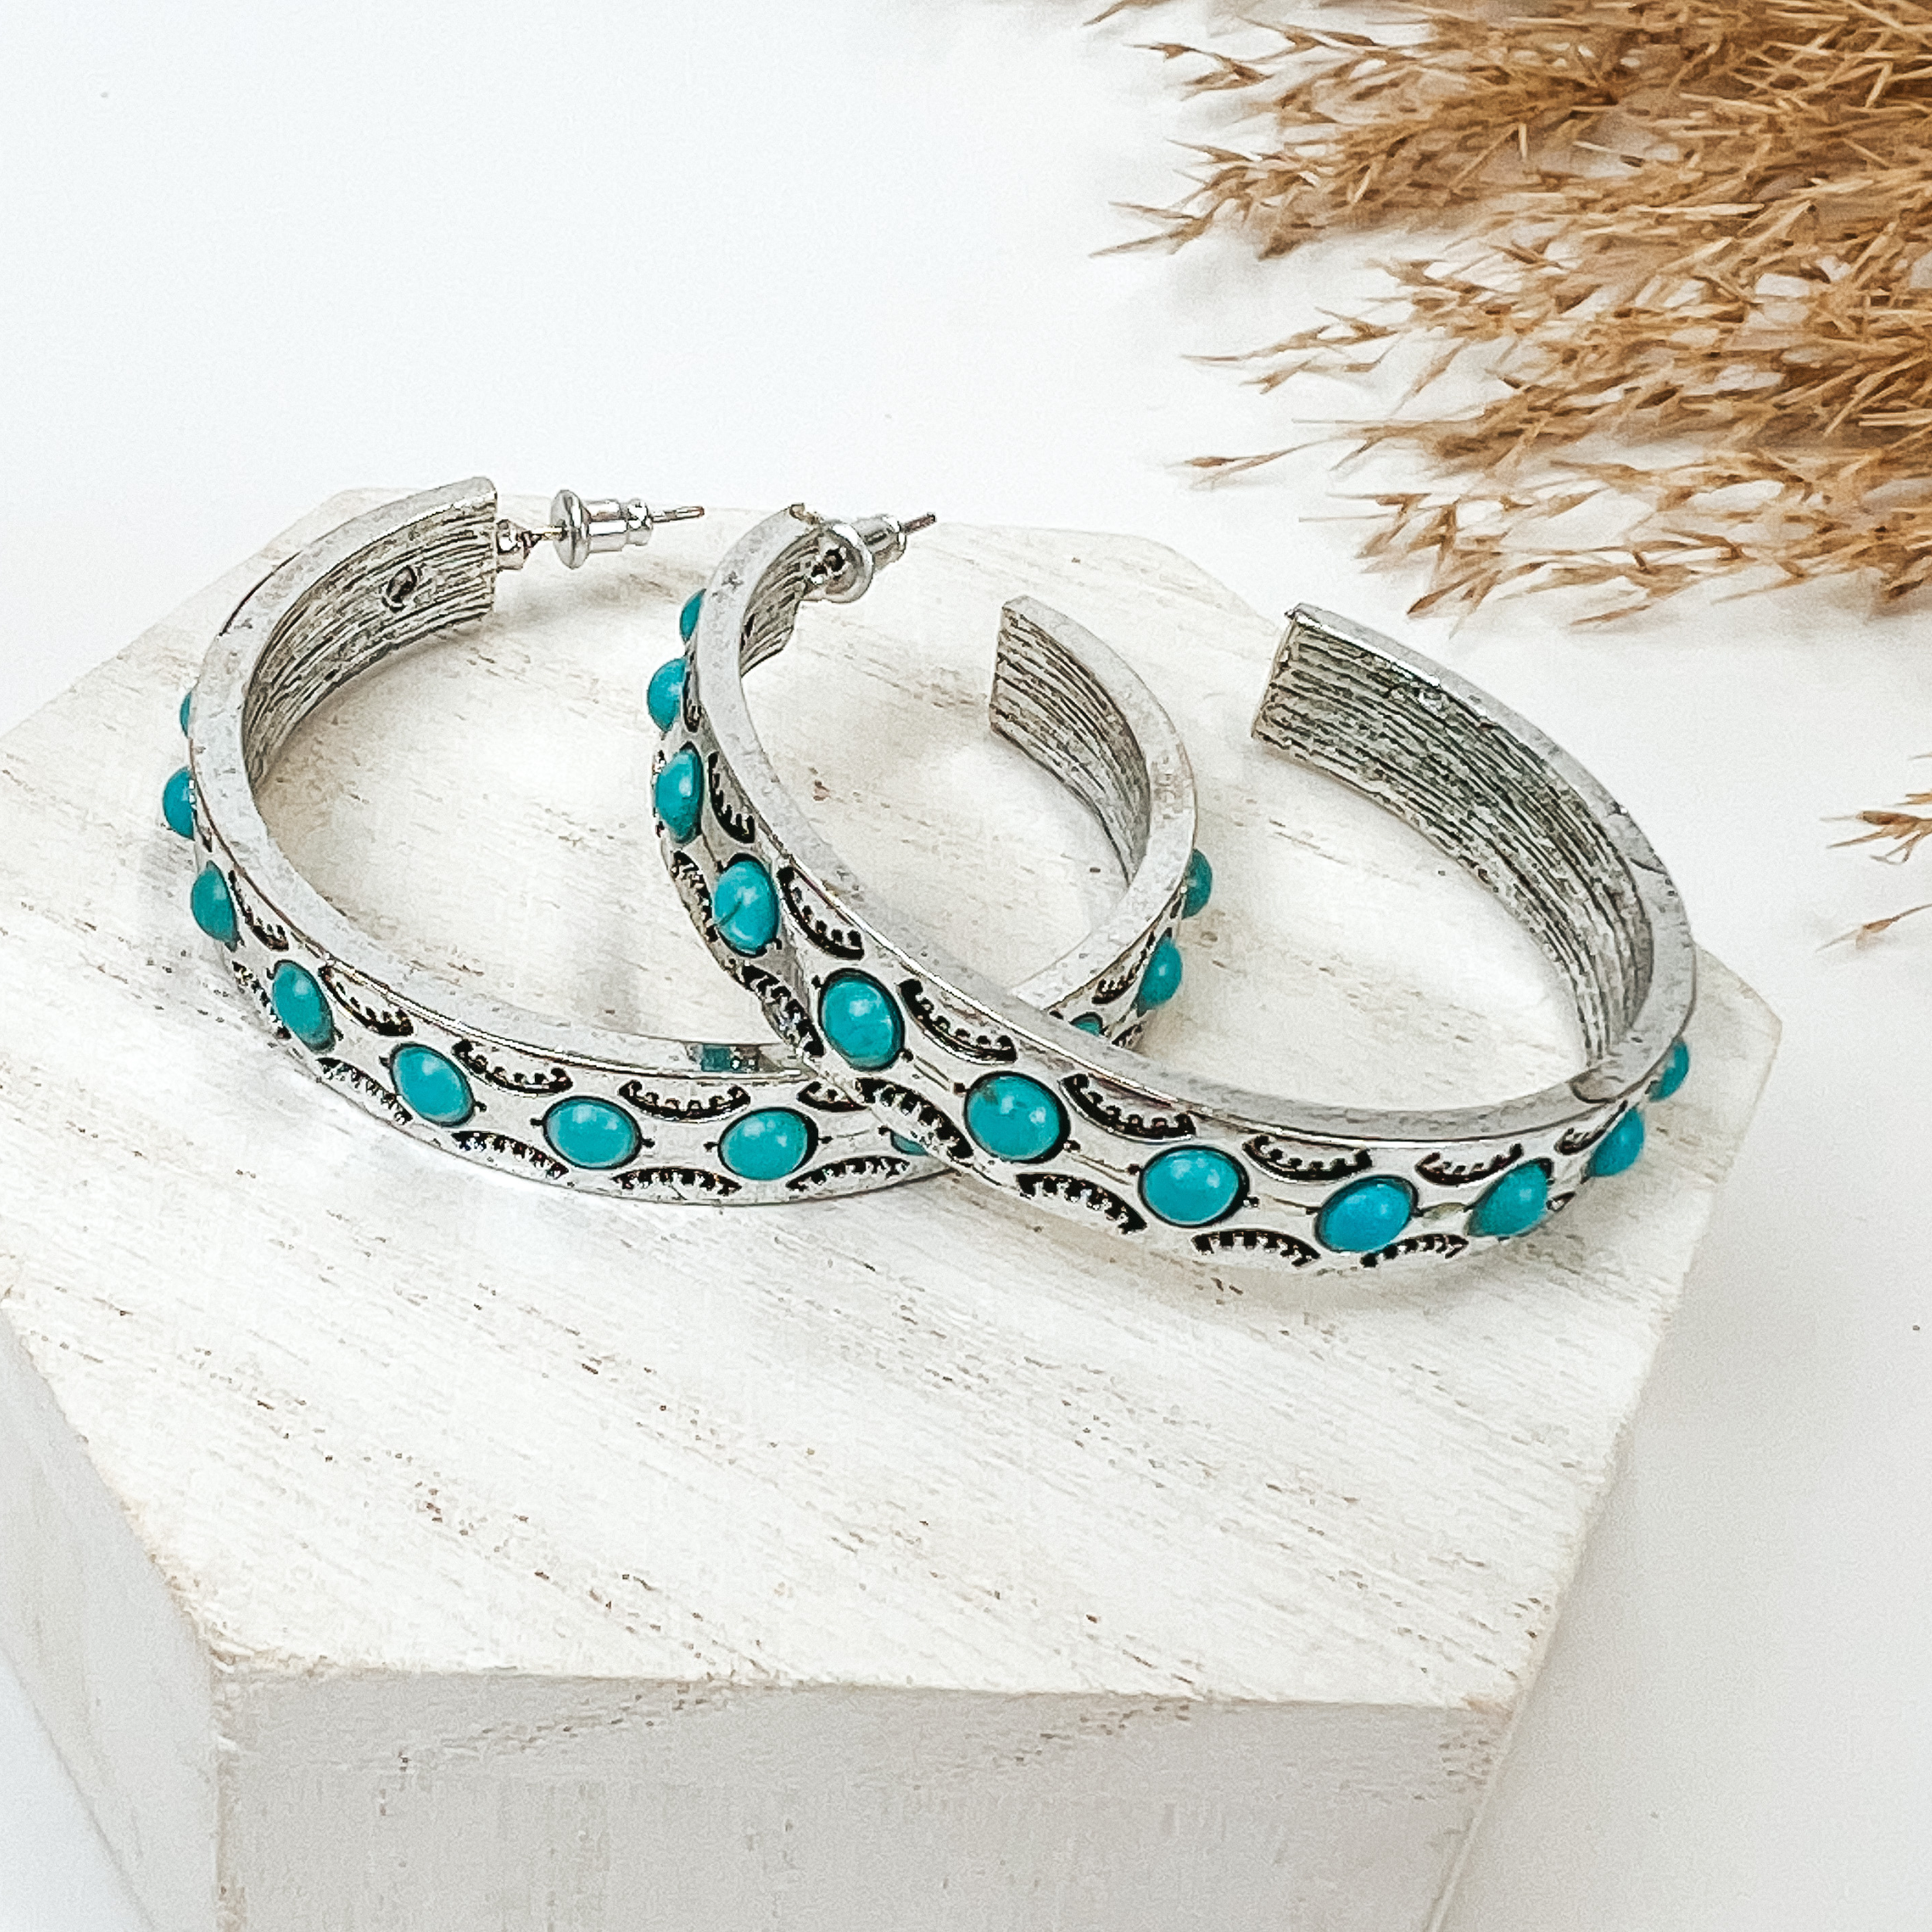 Semi hoop earrings in silver tone with turquoise stones, pictured with pampas grass, on a white background. 